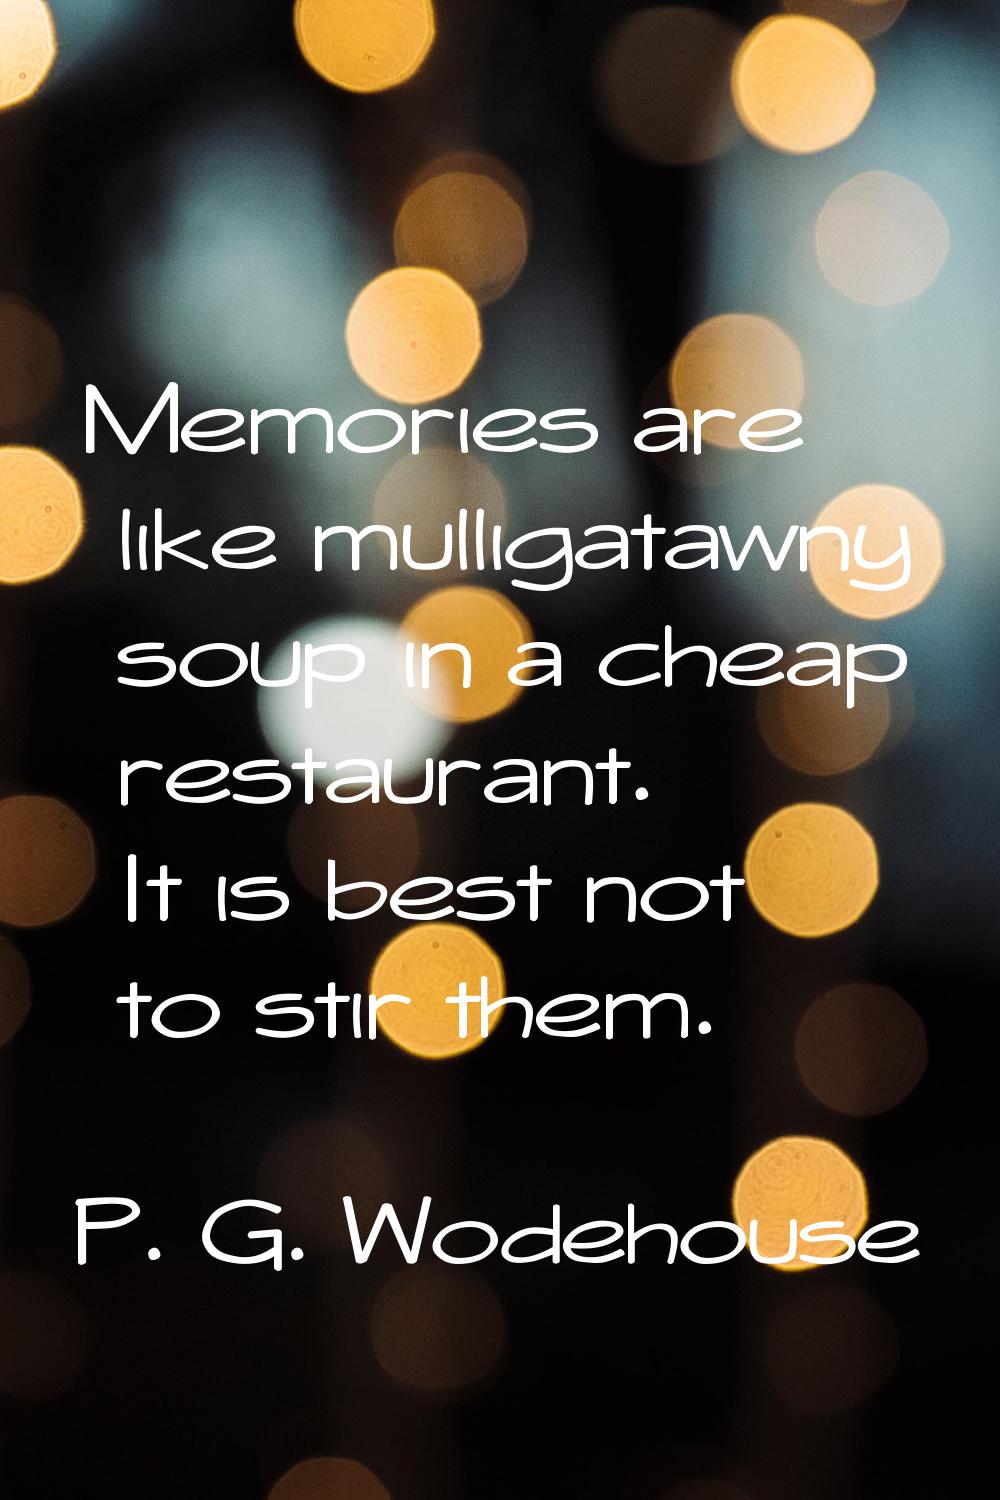 Memories are like mulligatawny soup in a cheap restaurant. It is best not to stir them.